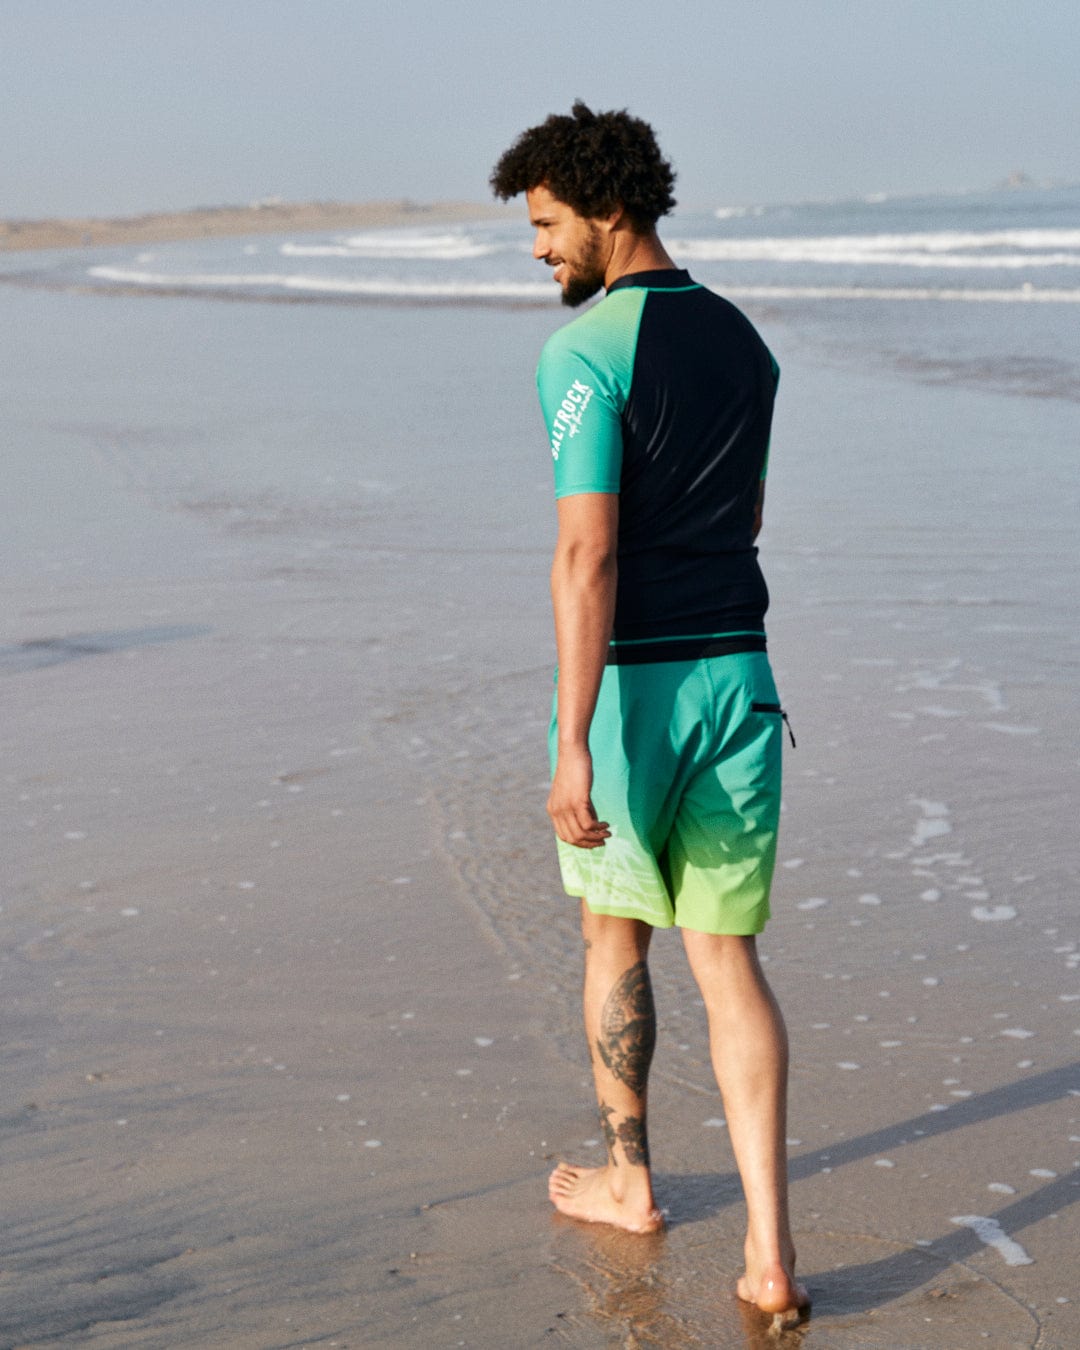 A man with curly hair walking on a beach, wearing a Saltrock Geo Palms Mens Boardshorts in Green.